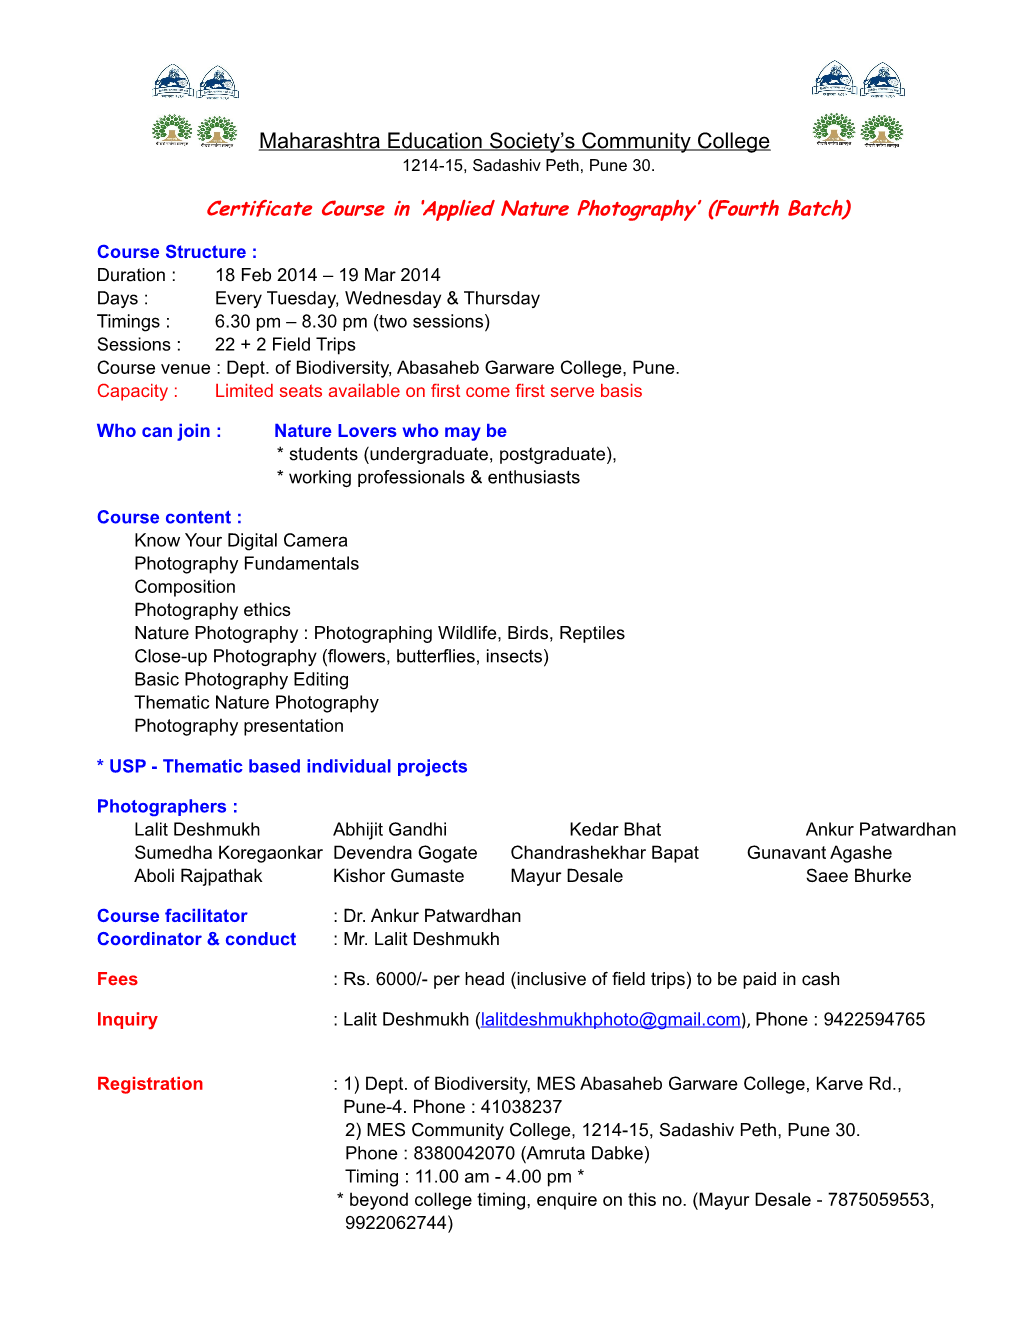 Certificate Course in Applied Nature Photography (Fourth Batch)